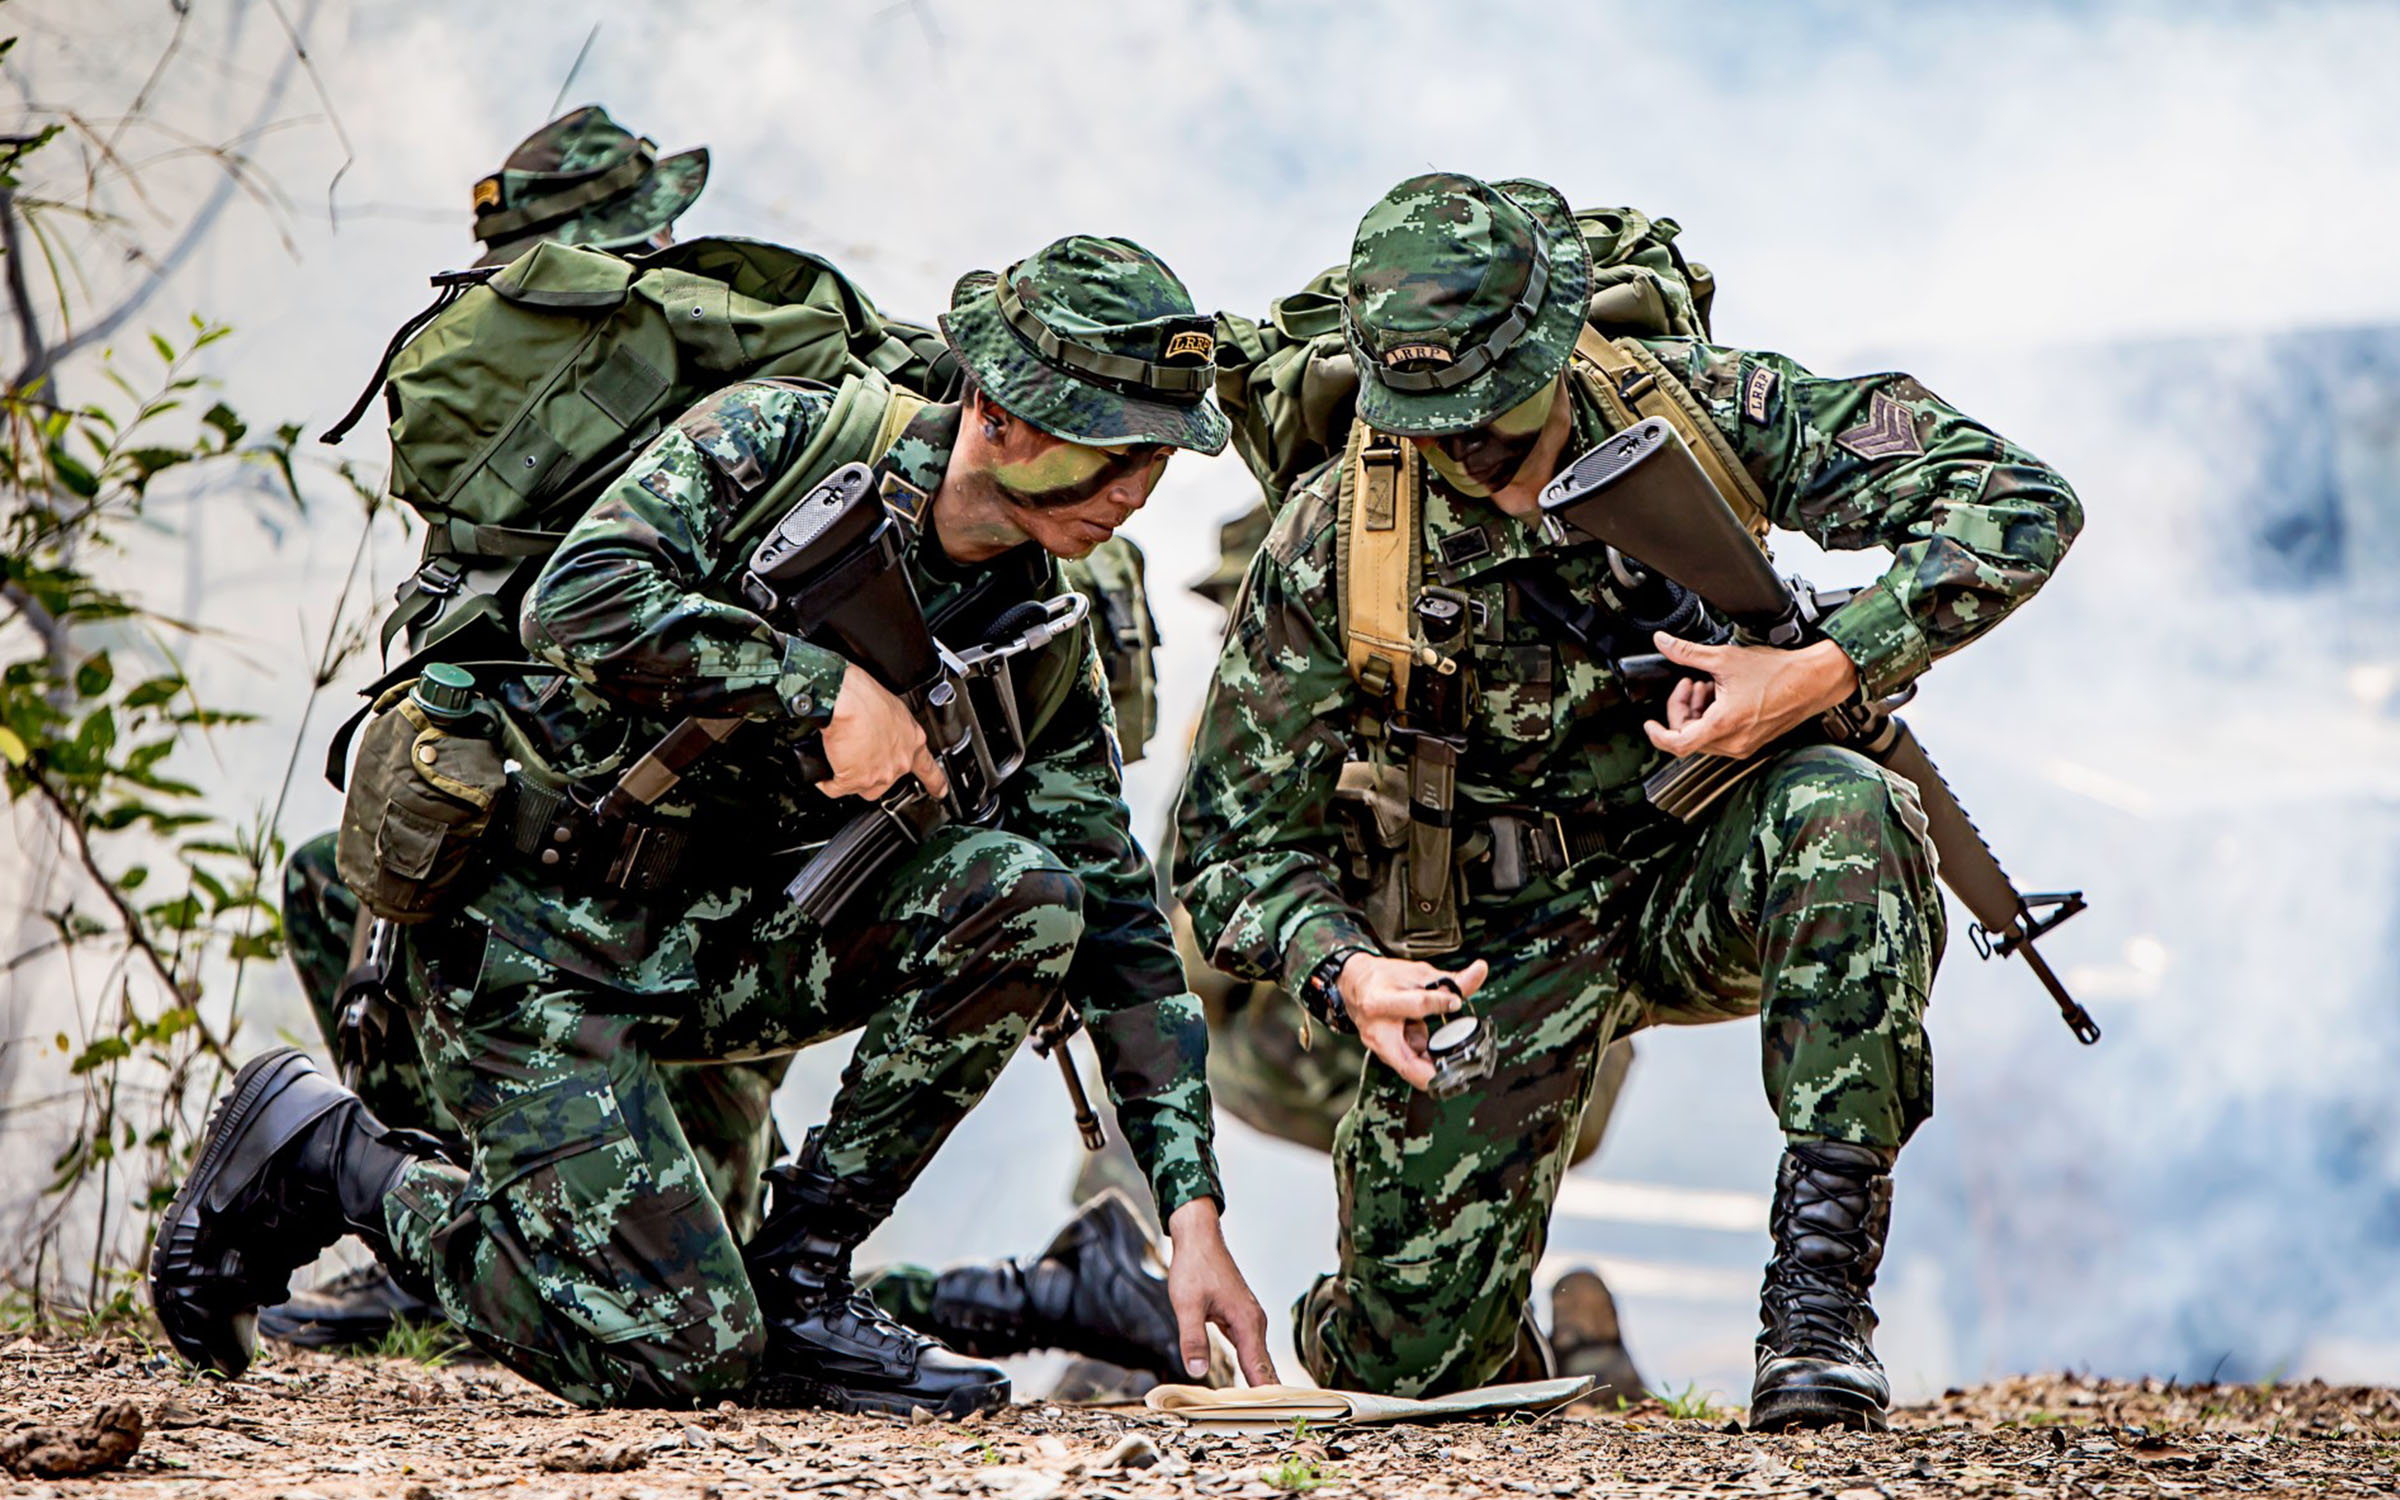 The iIntense training prepares the soldiers for action!